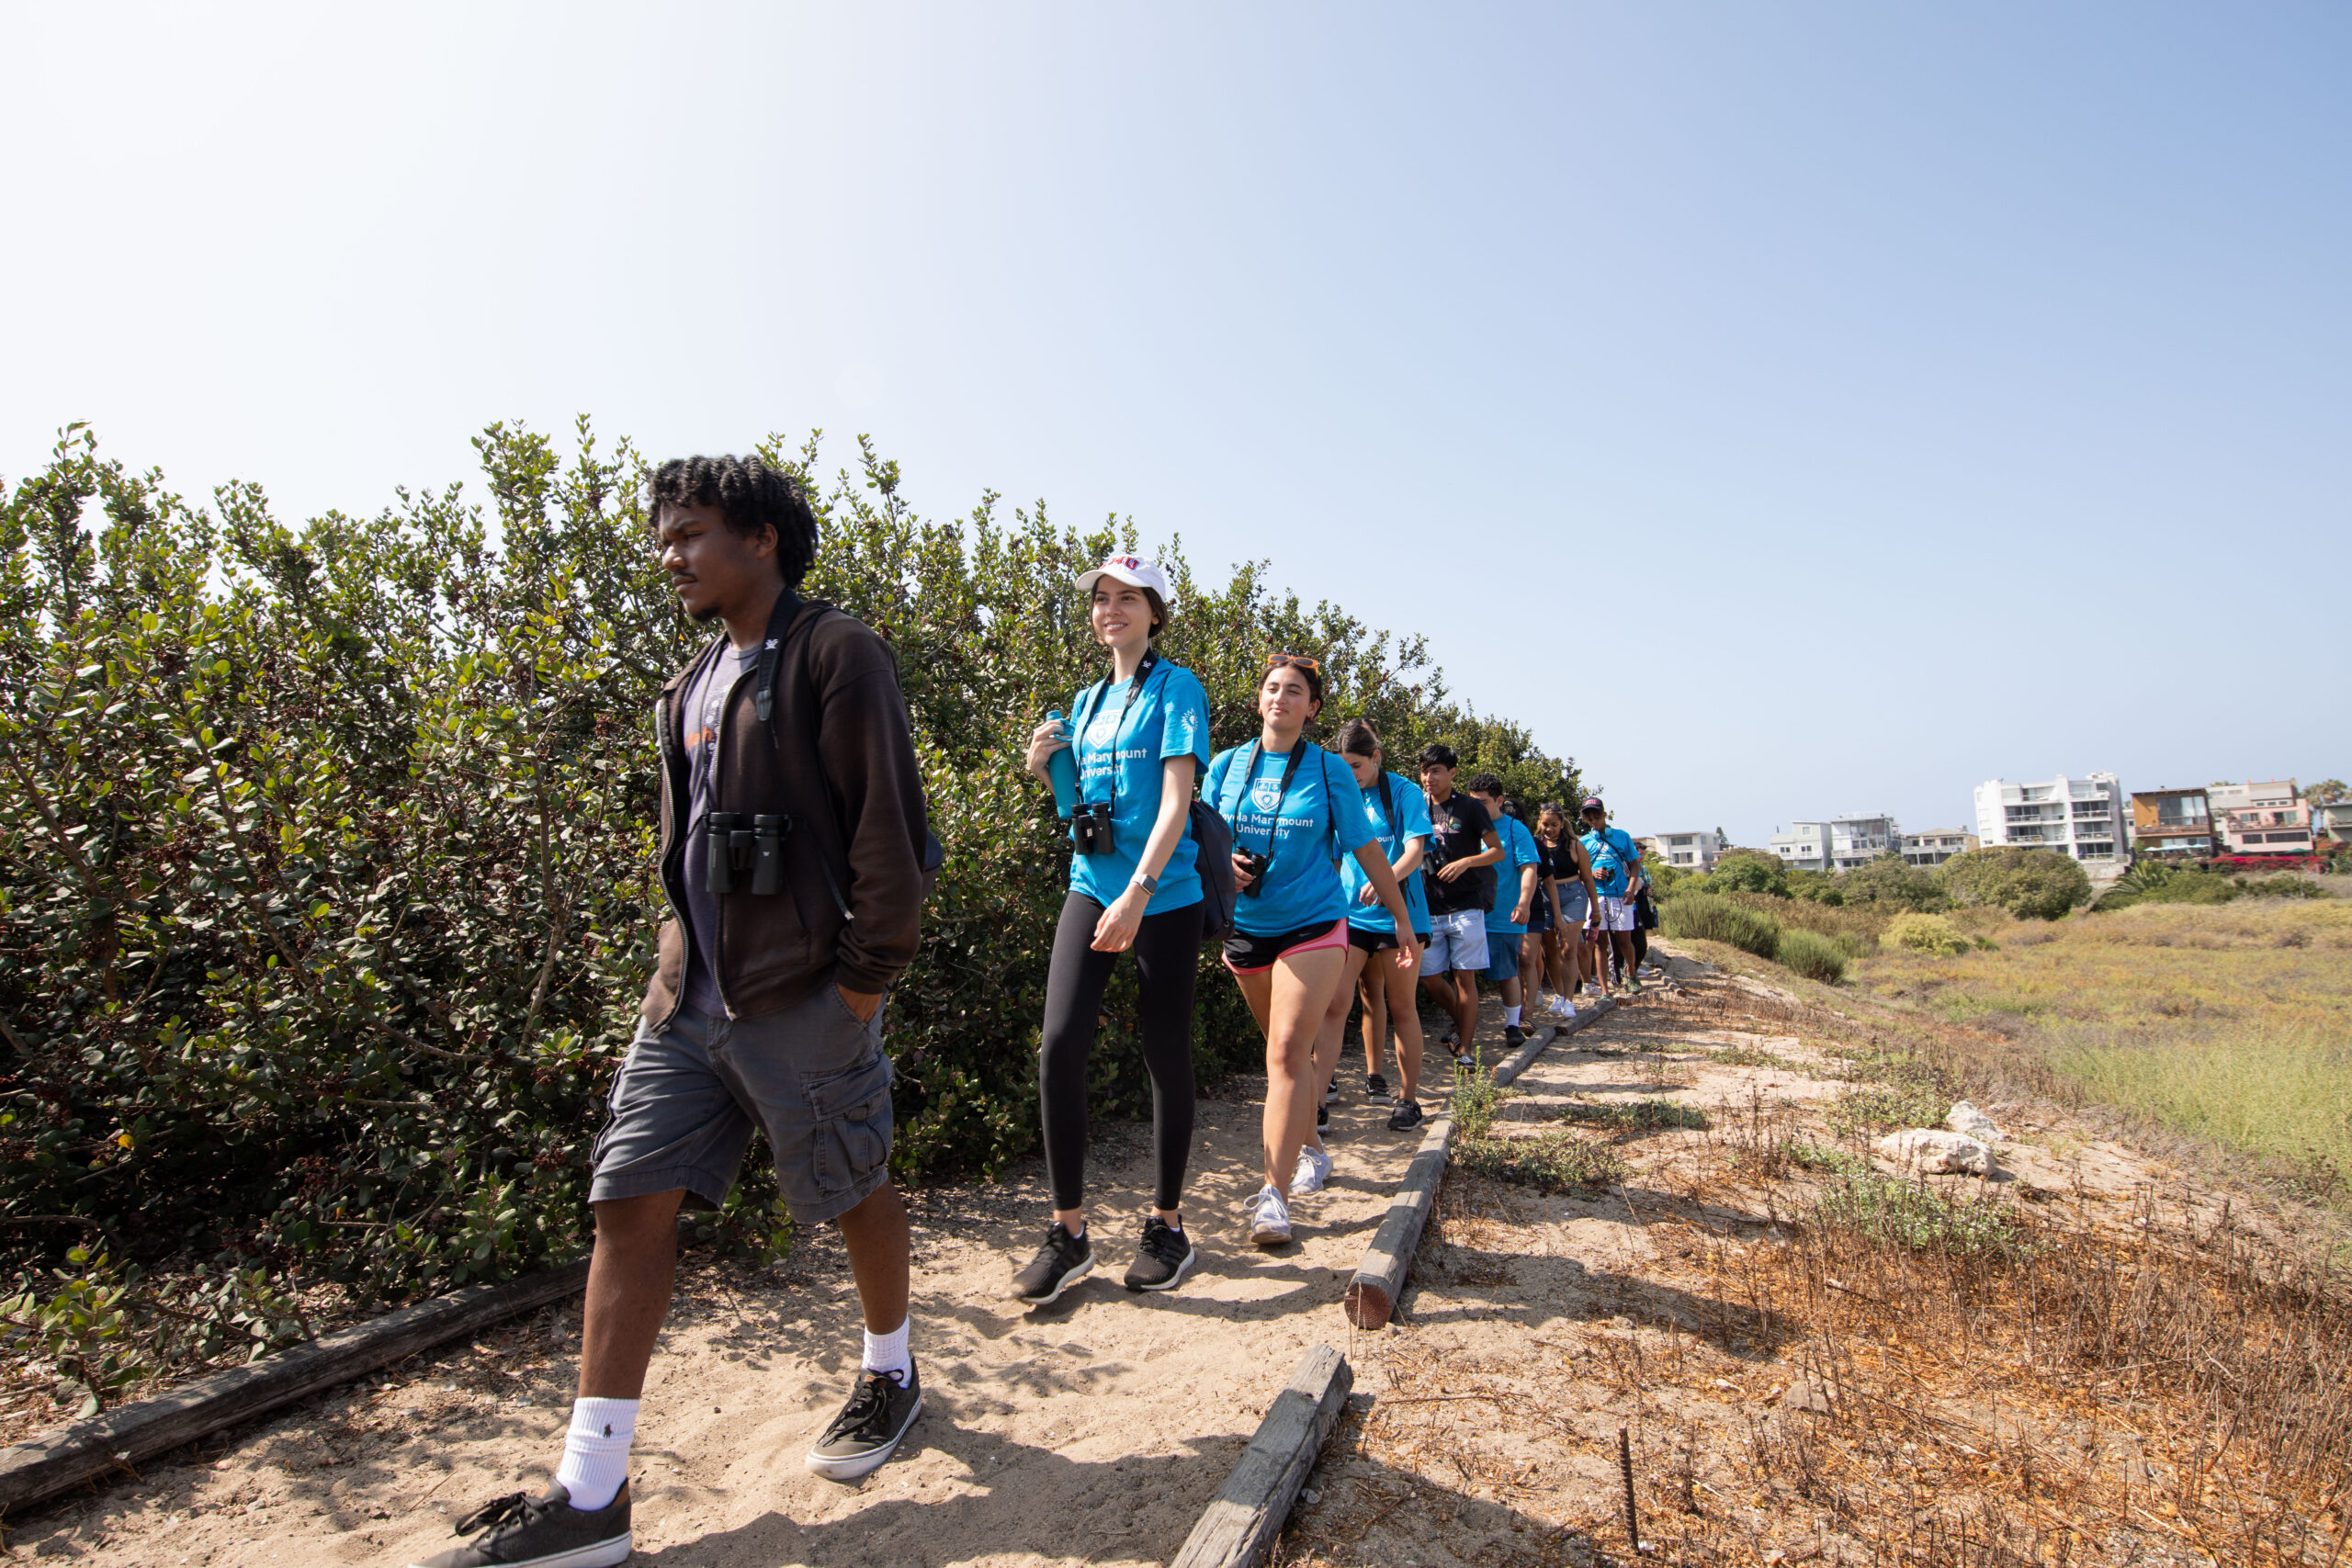 Students and a volunteer walk outside on a dirt path.